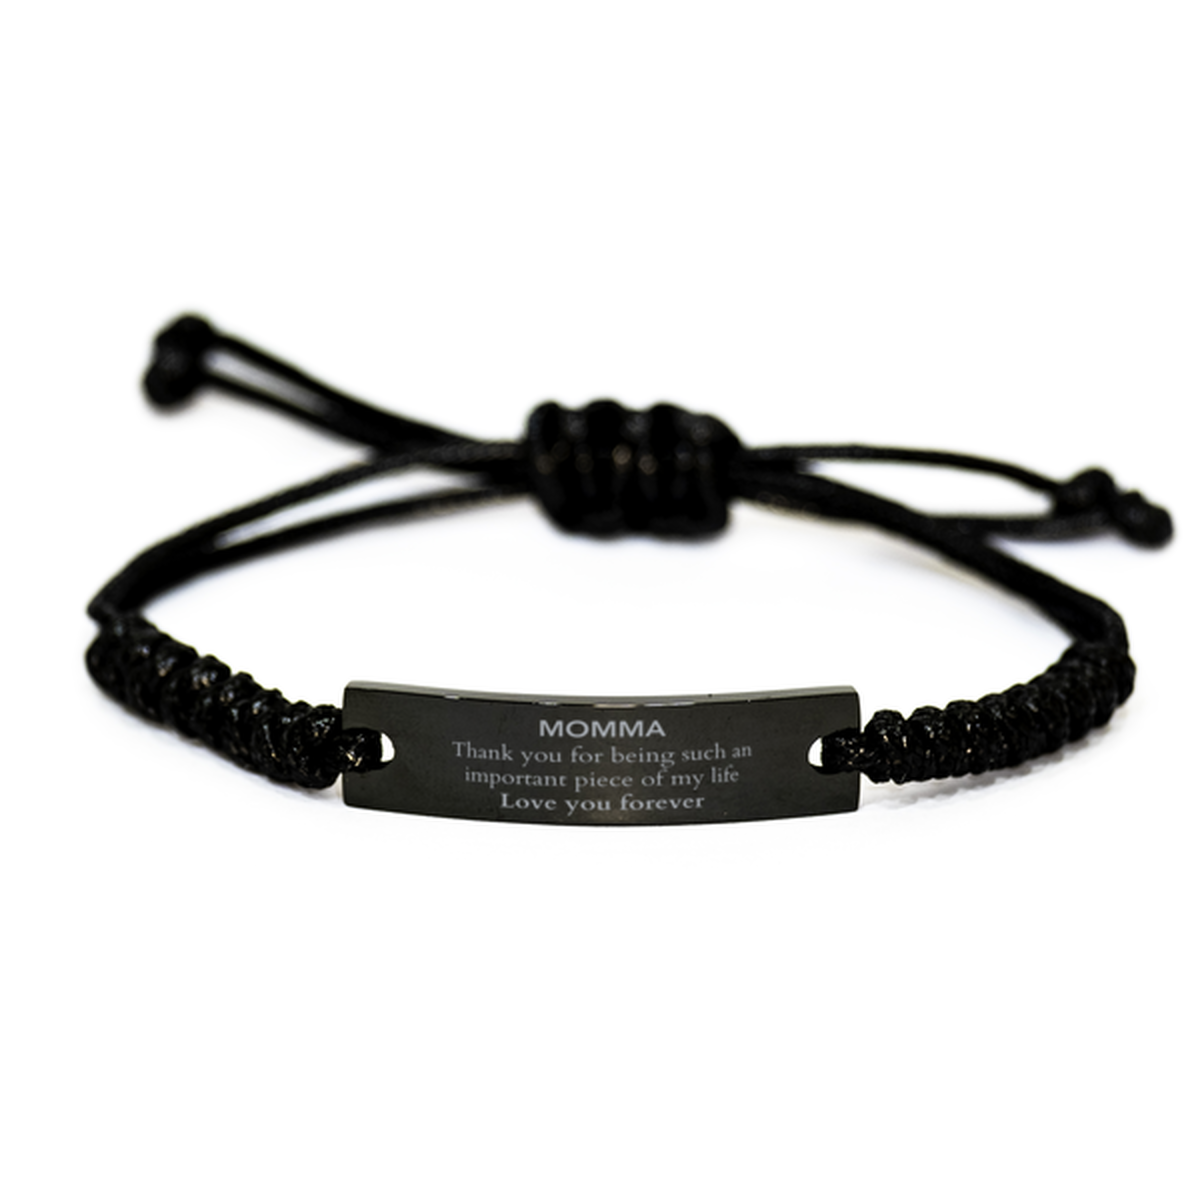 Appropriate Momma Black Rope Bracelet Epic Birthday Gifts for Momma Thank you for being such an important piece of my life Momma Christmas Mothers Fathers Day